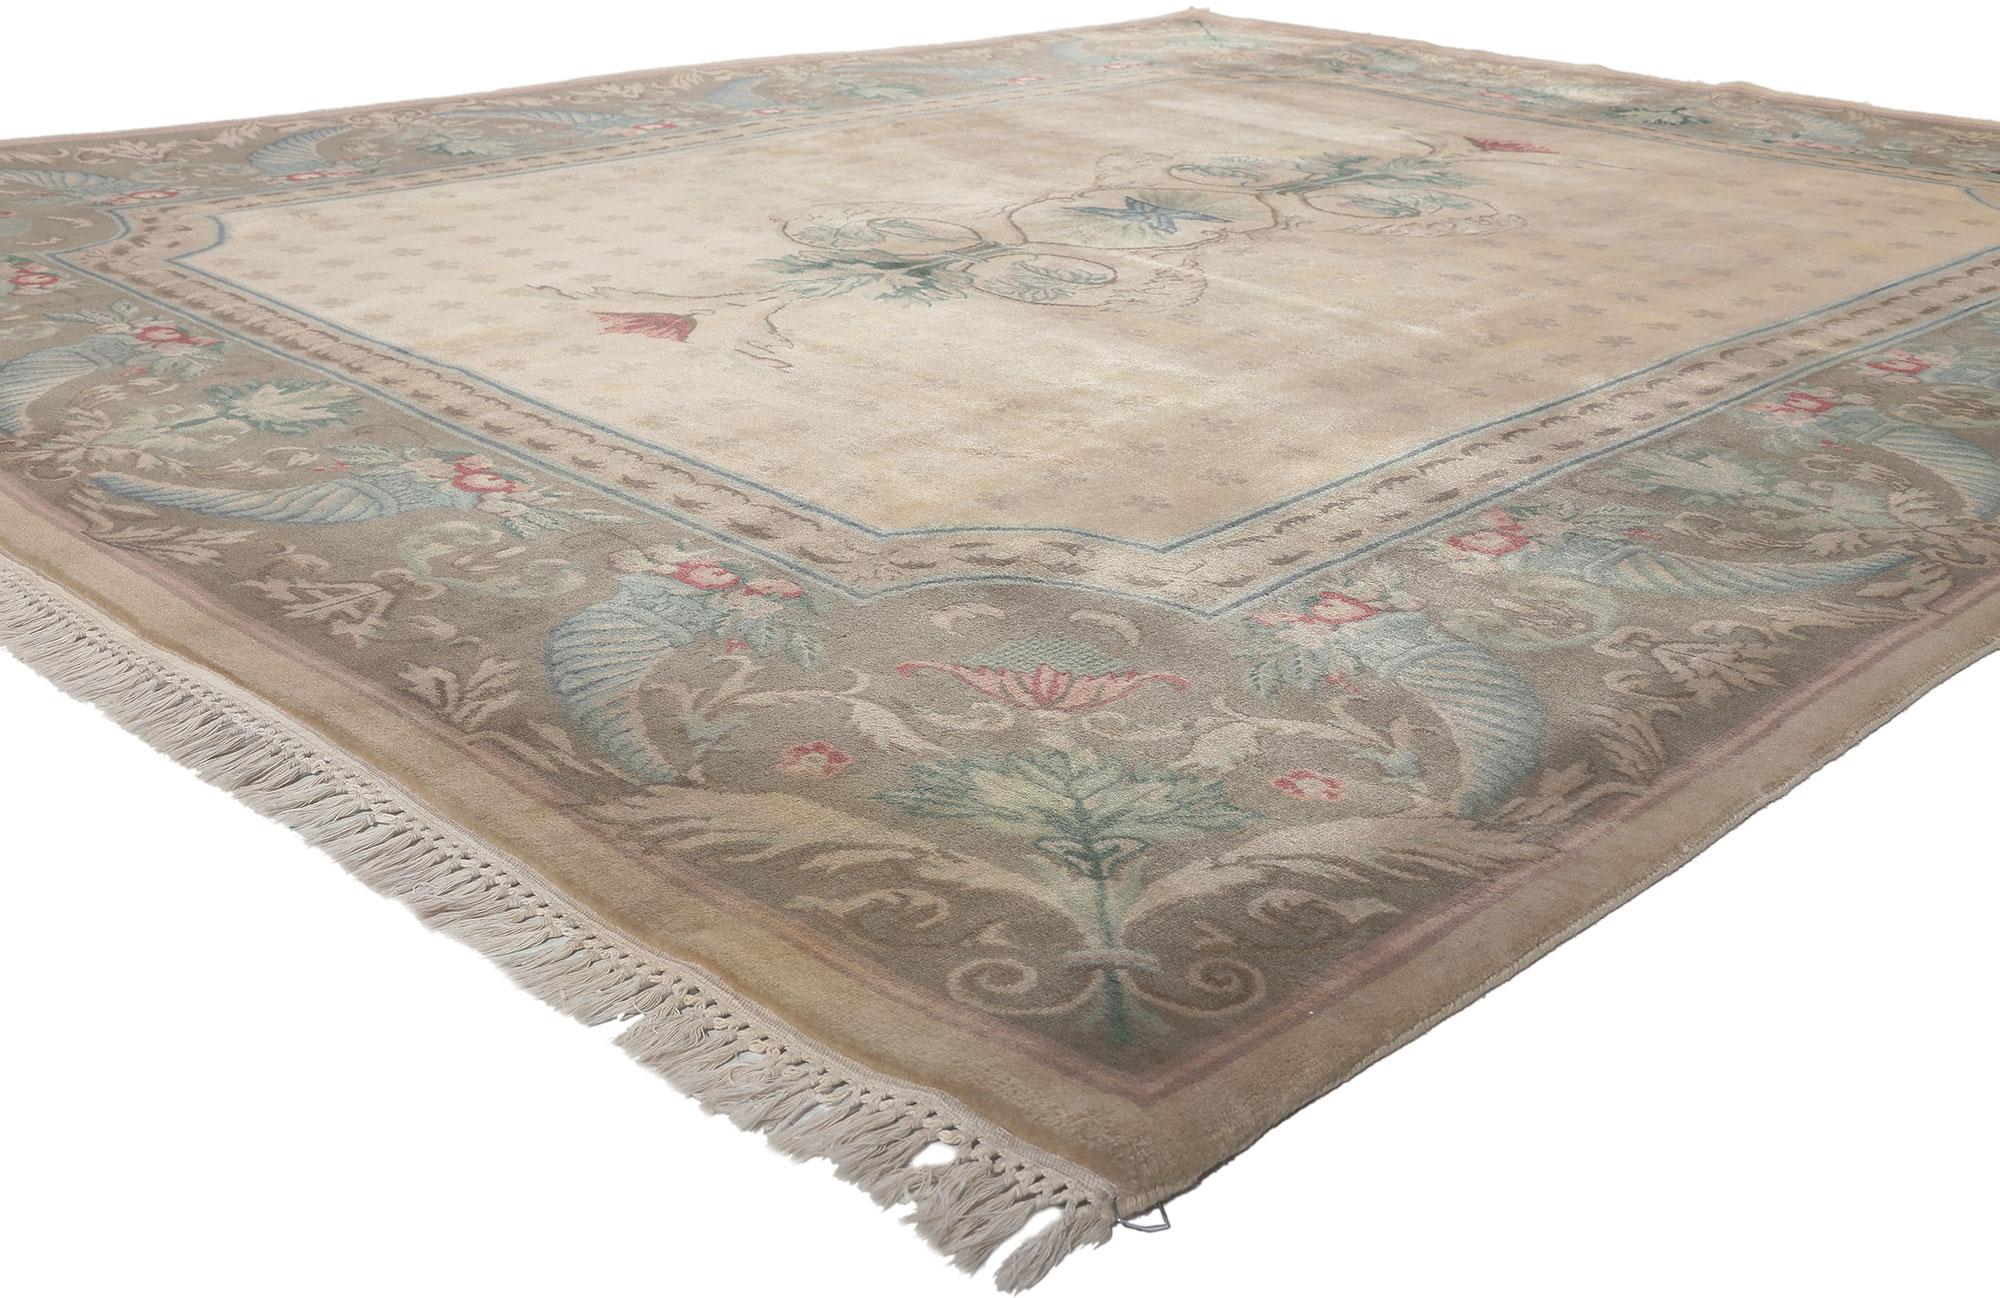 74753 Vintage Indian Savonnerie Rug, 08'02 x 10'00.
European charm meets French Country style in this hand knotted wool vintage Indian Savonnerie rug. The intricate design and soft earthy colors woven into this piece work together creating a refined